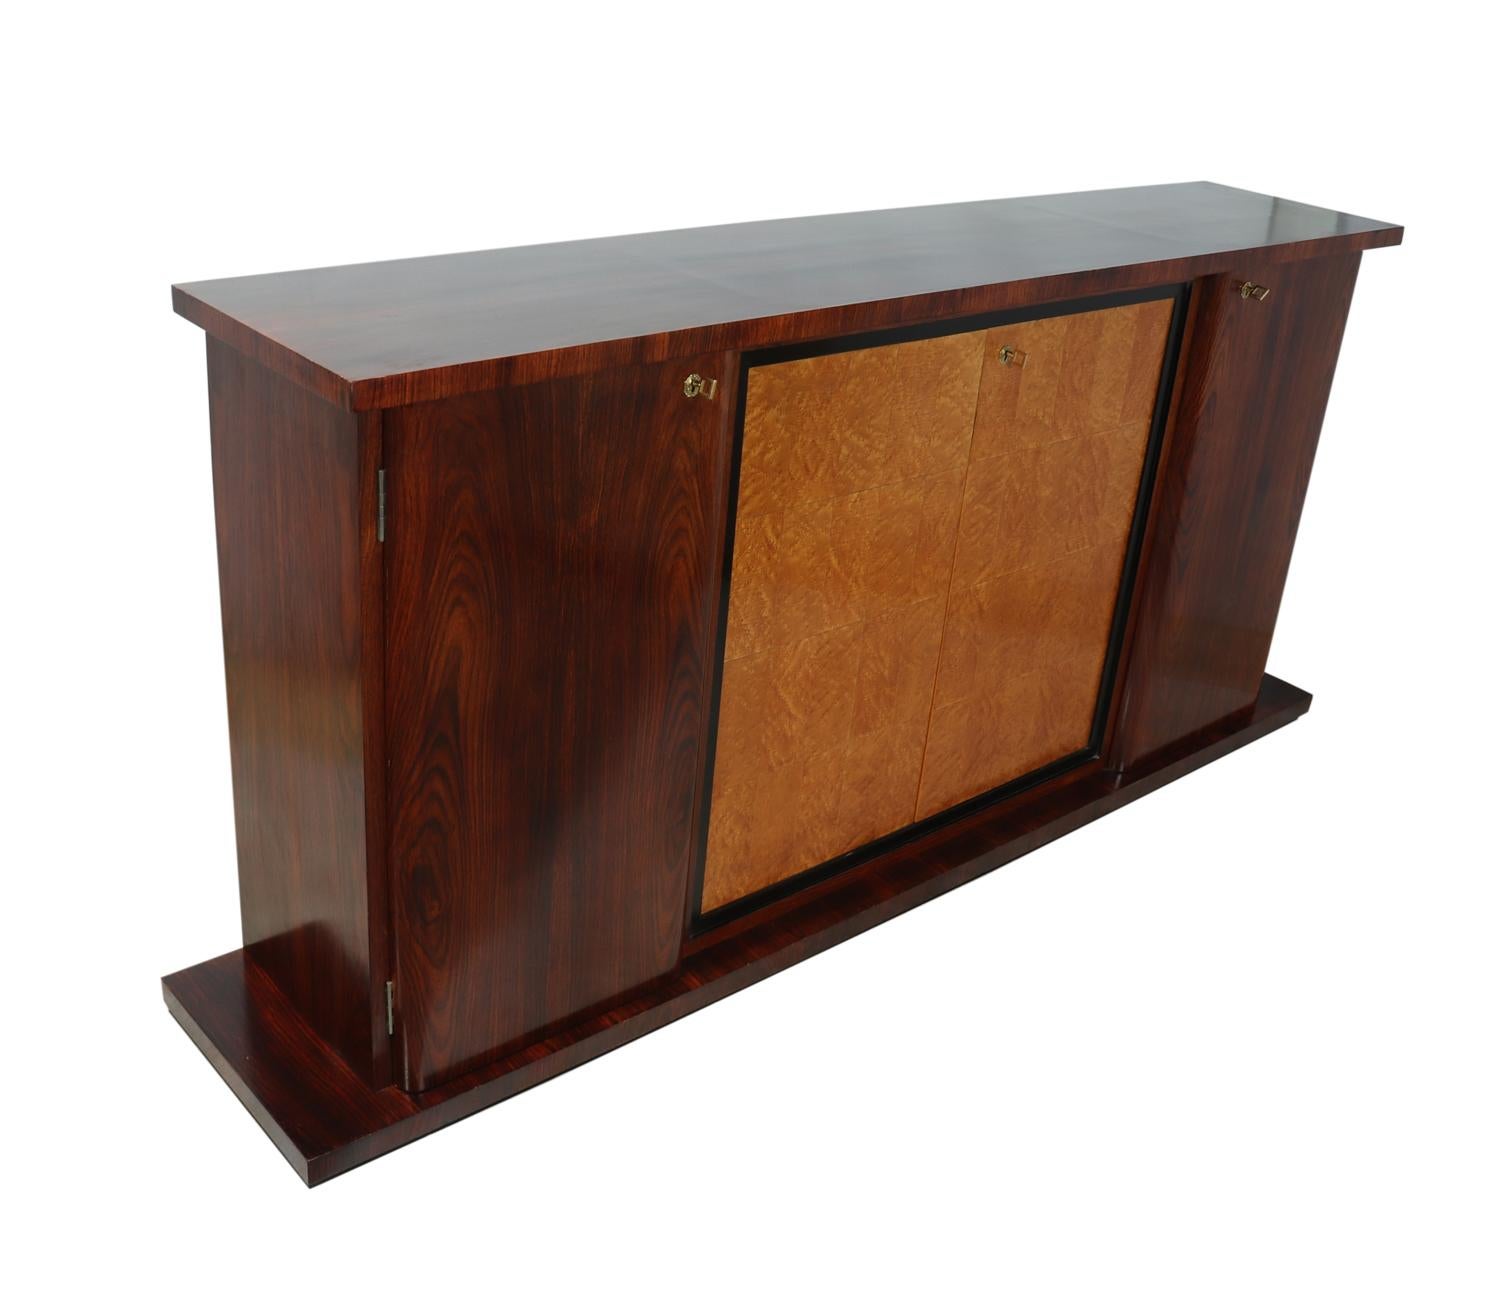 Italian Art Deco Sideboard in Rosewood and Bird's-Eye Maple For Sale 2